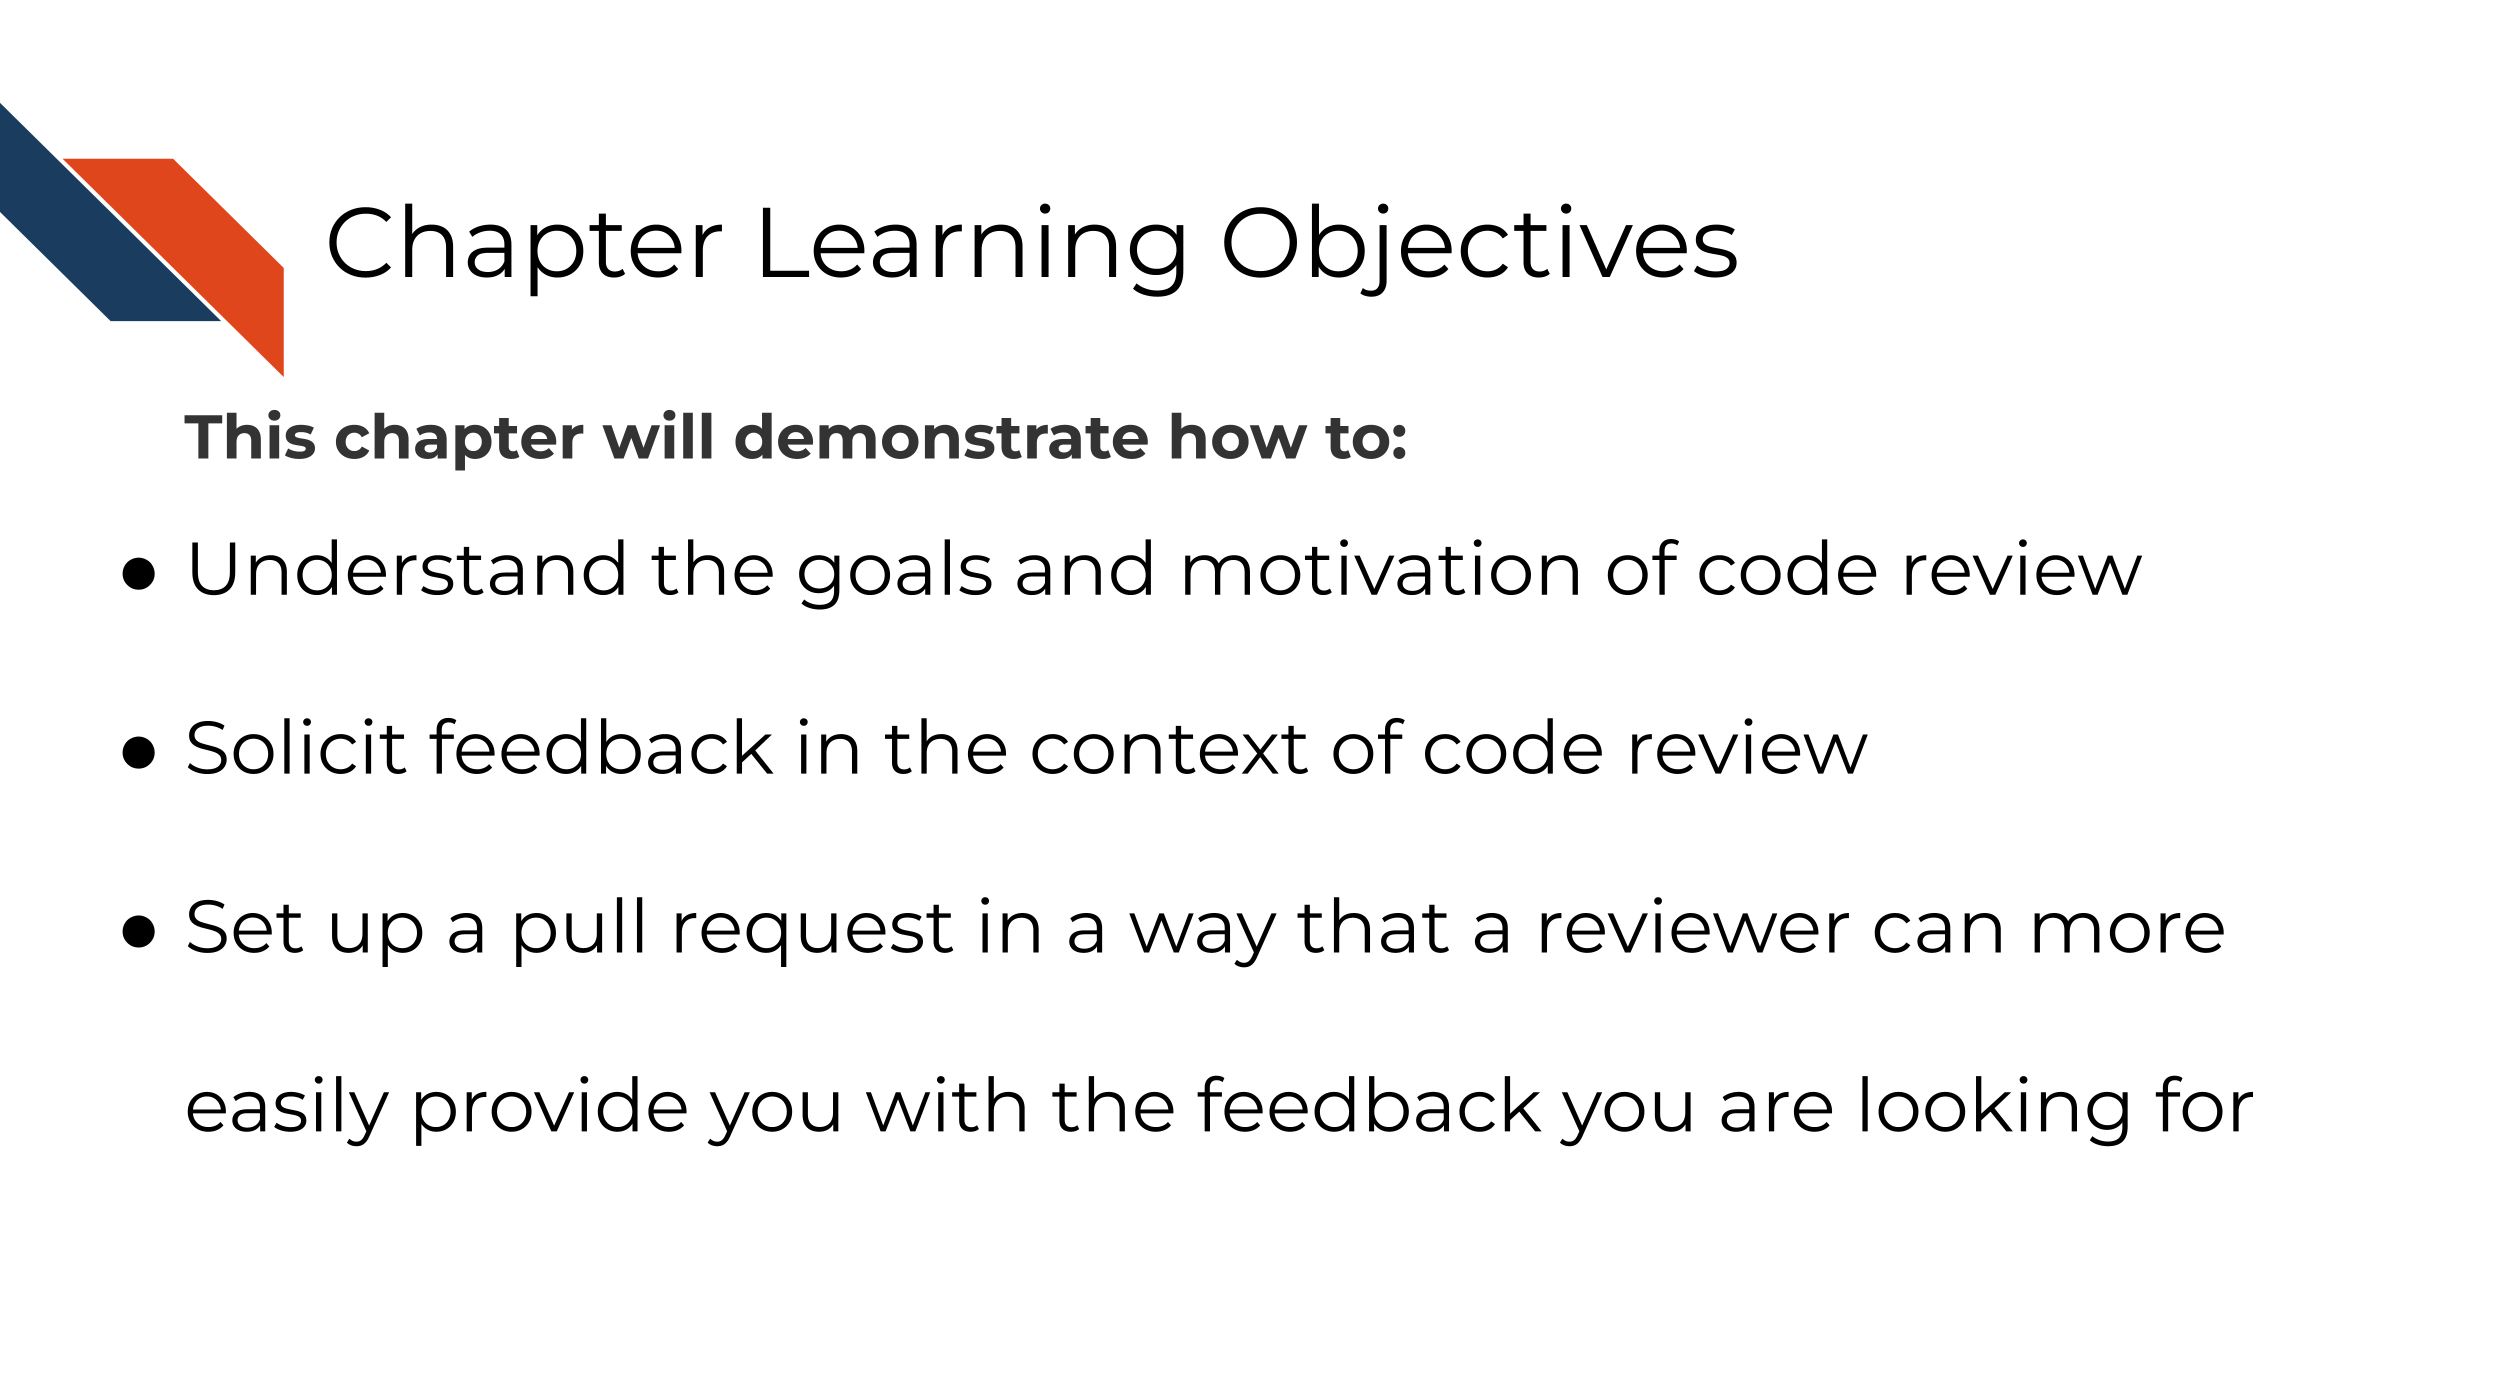 Learning objectives This chapter will demonstrate how to: Understand the goals and motivation of code review. Solicit feedback in the context of code review. Incorporate feedback in the context of code review.